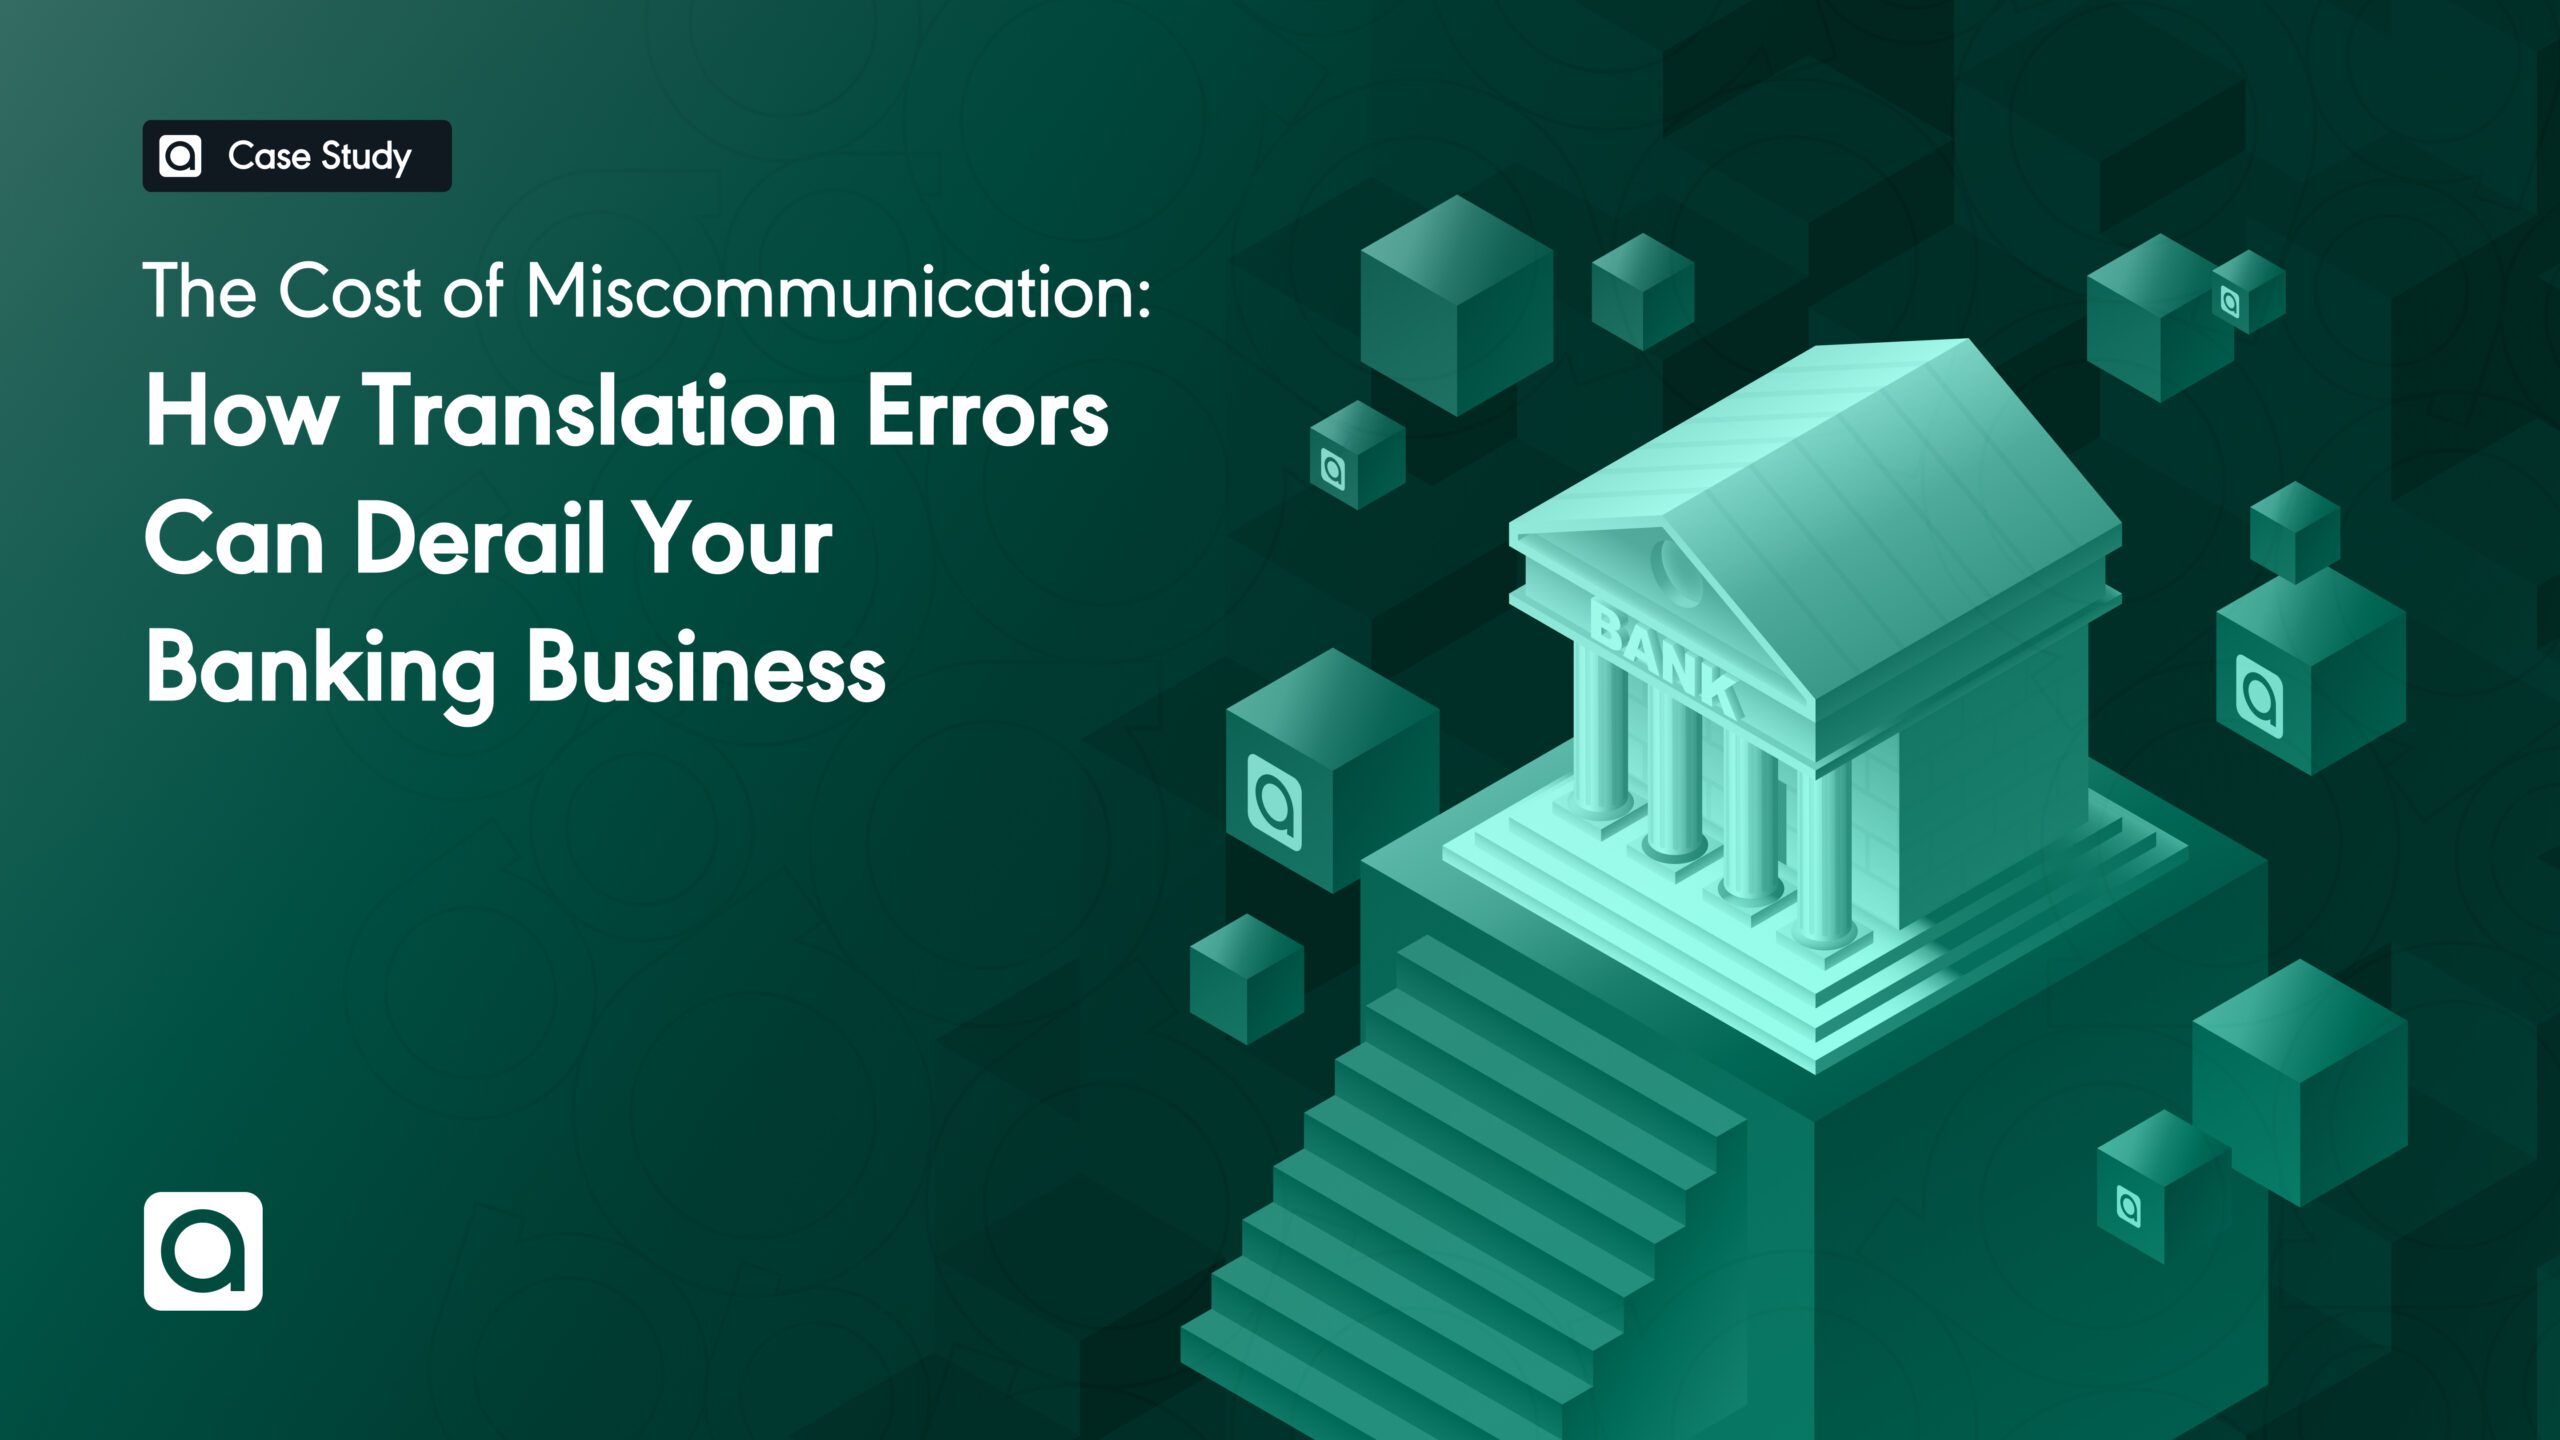 The Cost of Miscommunication: How Translation Errors Can Derail Your Banking Business 